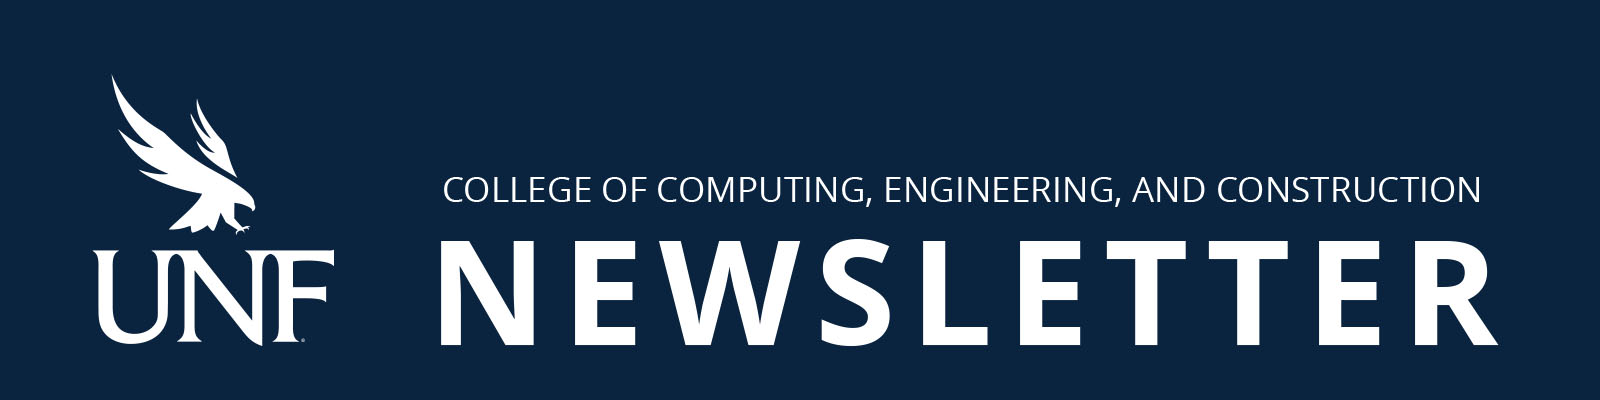 college of computing engineering and construction newsletter with unf logo